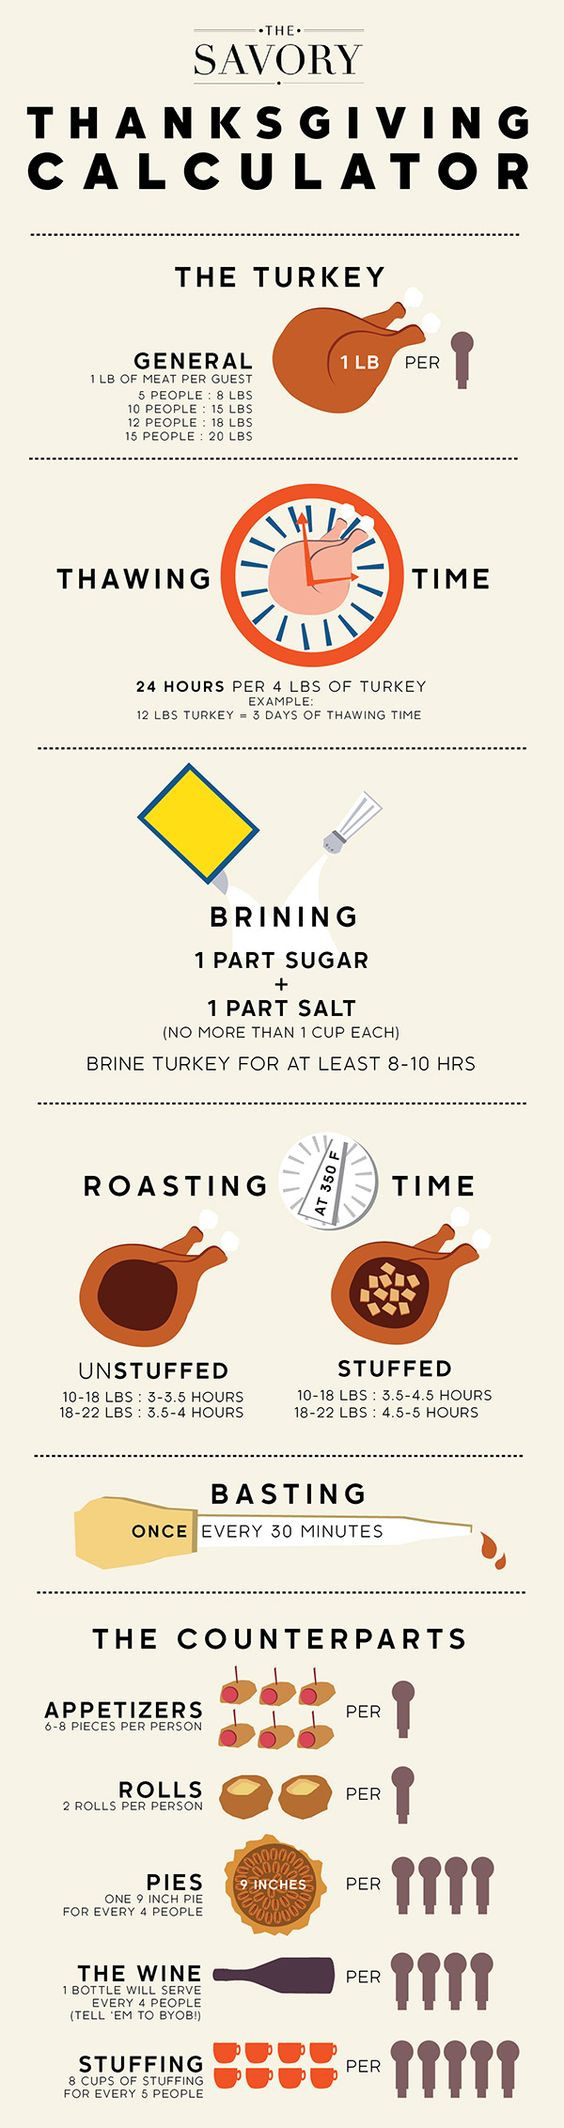 Thanksgiving Food Calculator
 Want to know how much turkey you’ll need for your